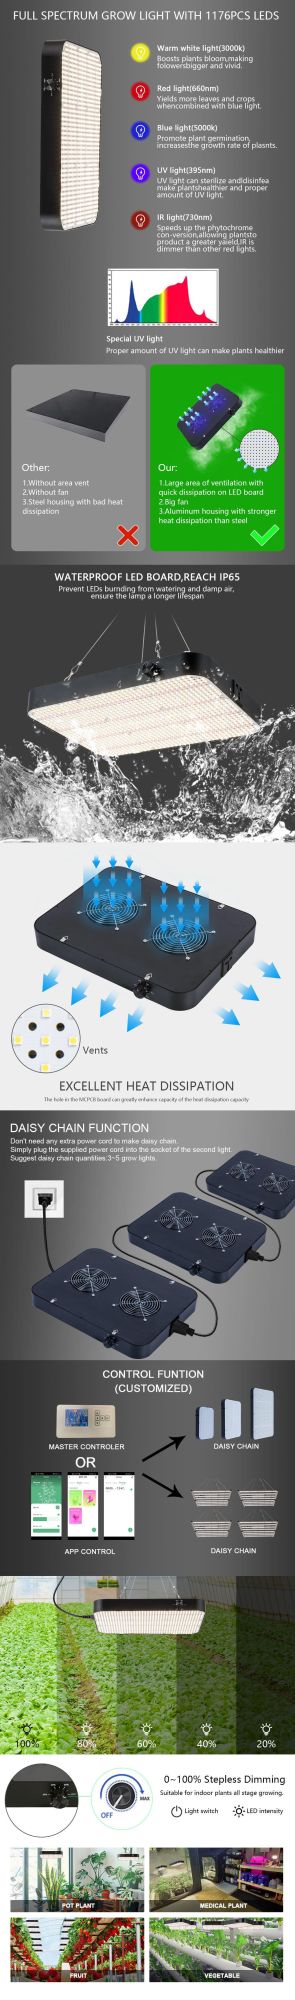 Waterproof 2 Quiet Cooling Fan for Gardening Plan Grow Lighting for Seedling, Hydroponic, Greenhouse, Succulents, Flower